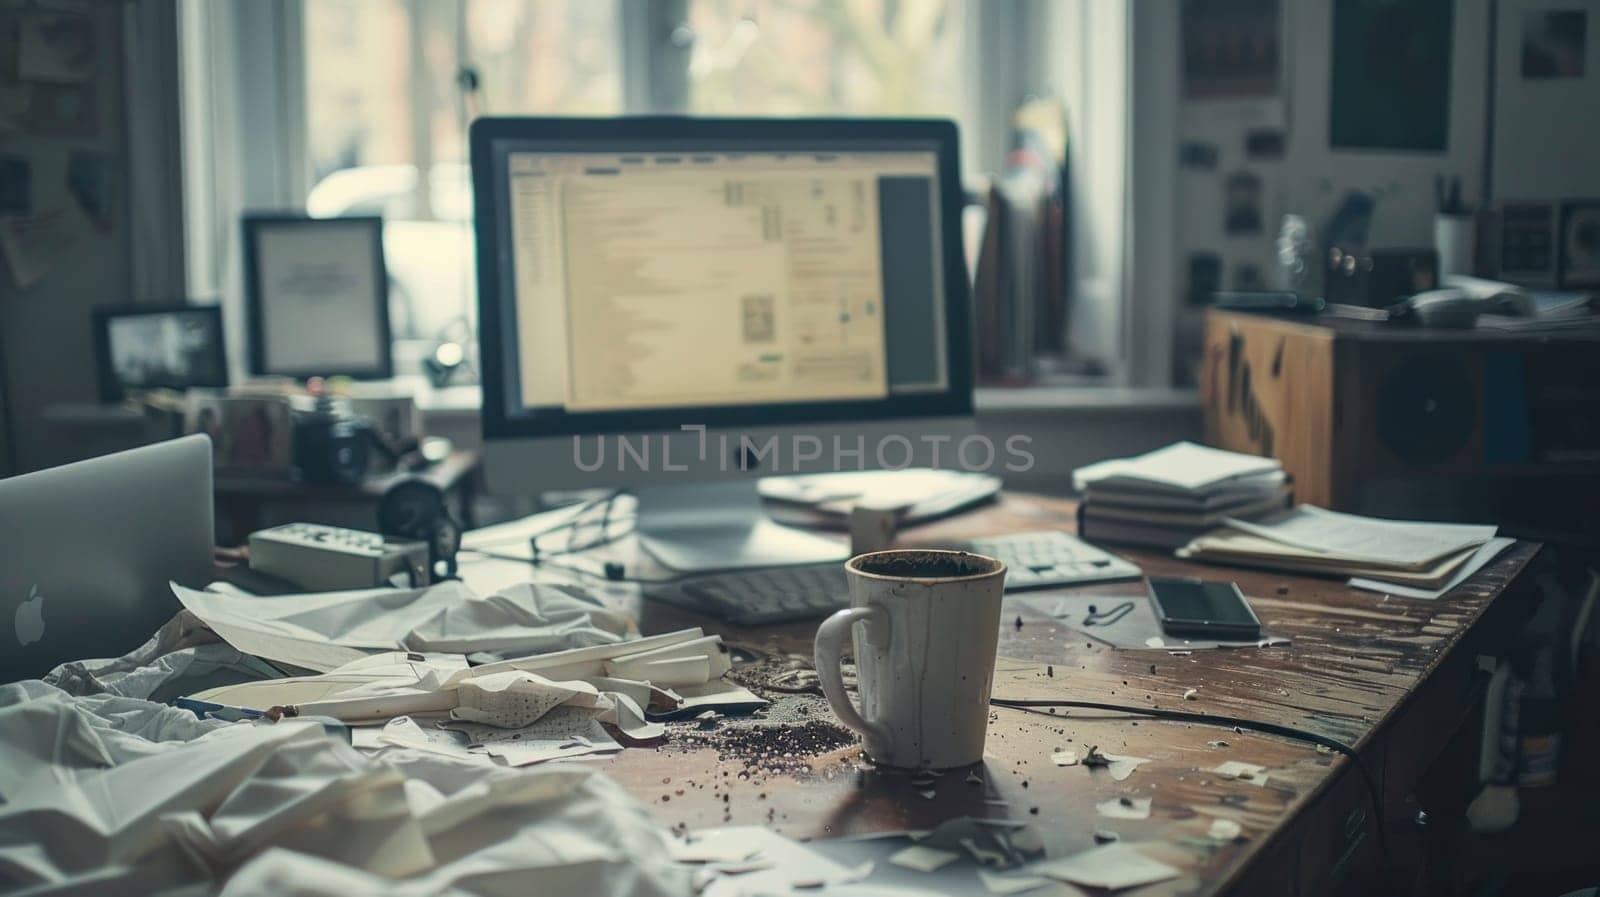 A messy desk with a spilled coffee cup, crumpled papers, and a deserted computer monitor. by golfmerrymaker